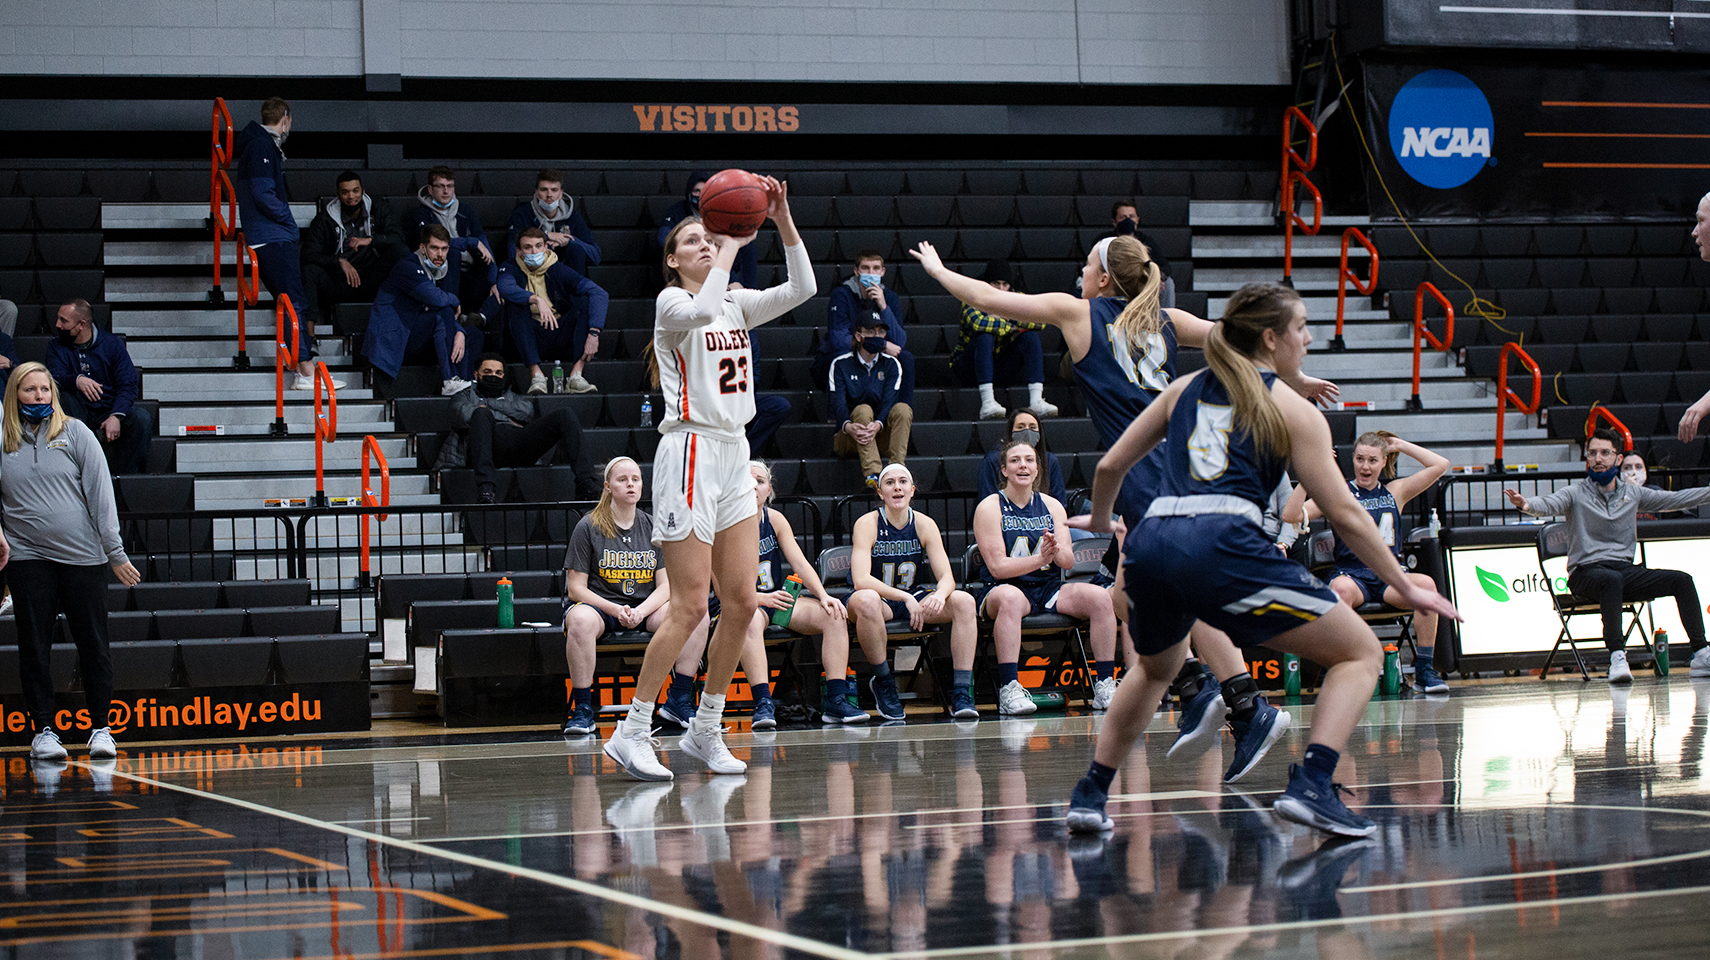 Women's basketball player shooting a jumper on the baseline